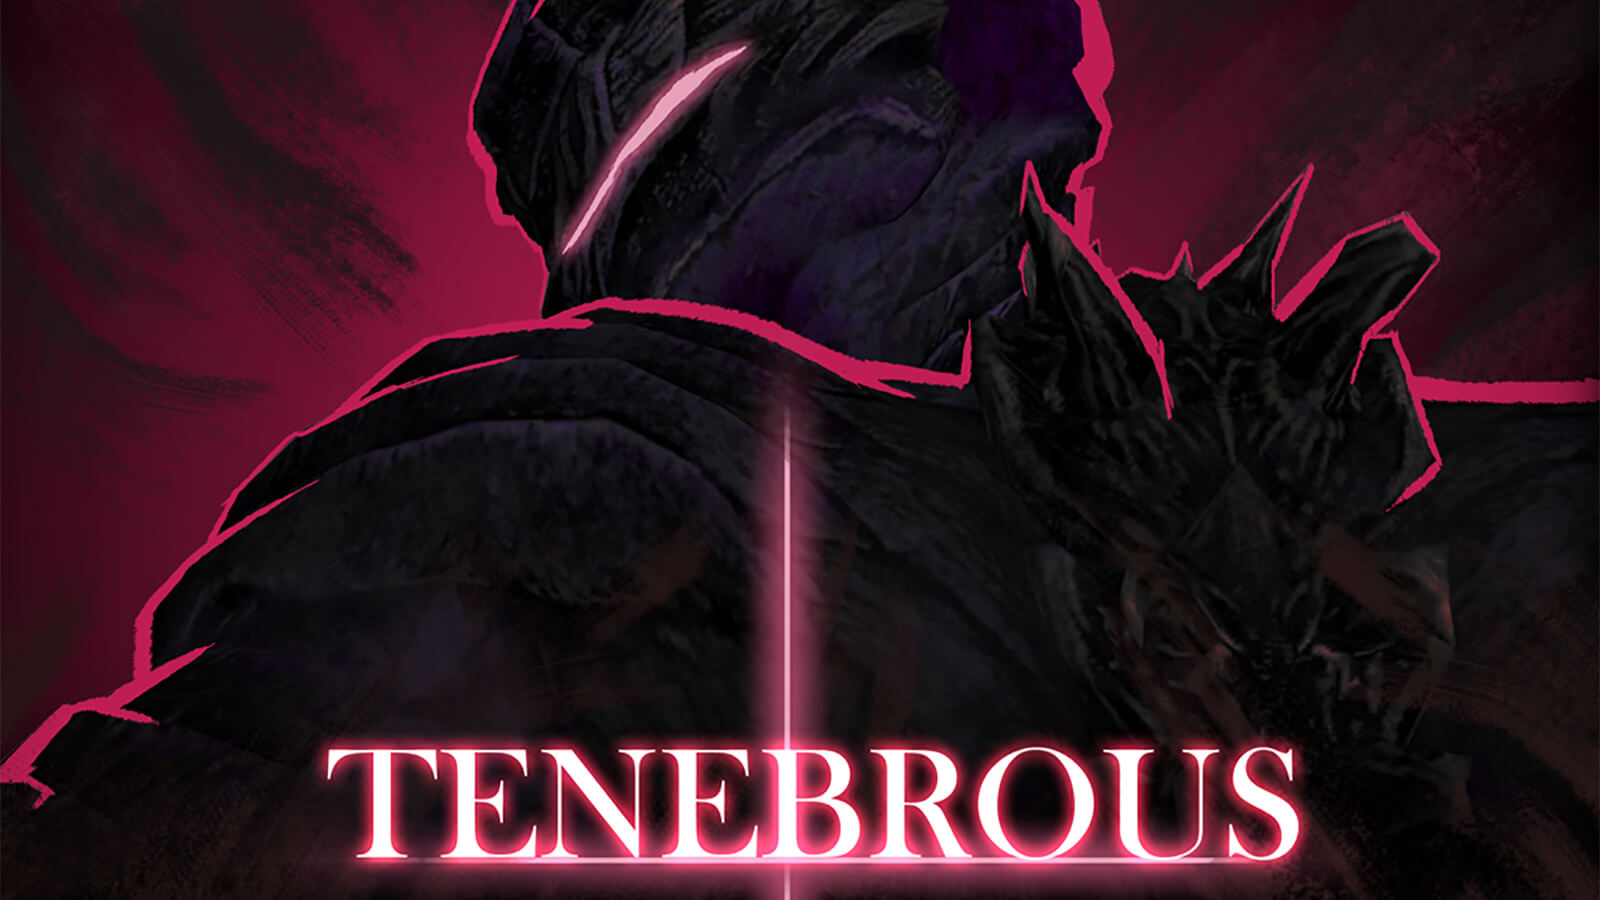 Title screen for the game Tenebrous, with a dark, stony humanoid looking over its shoulder against a magenta background.